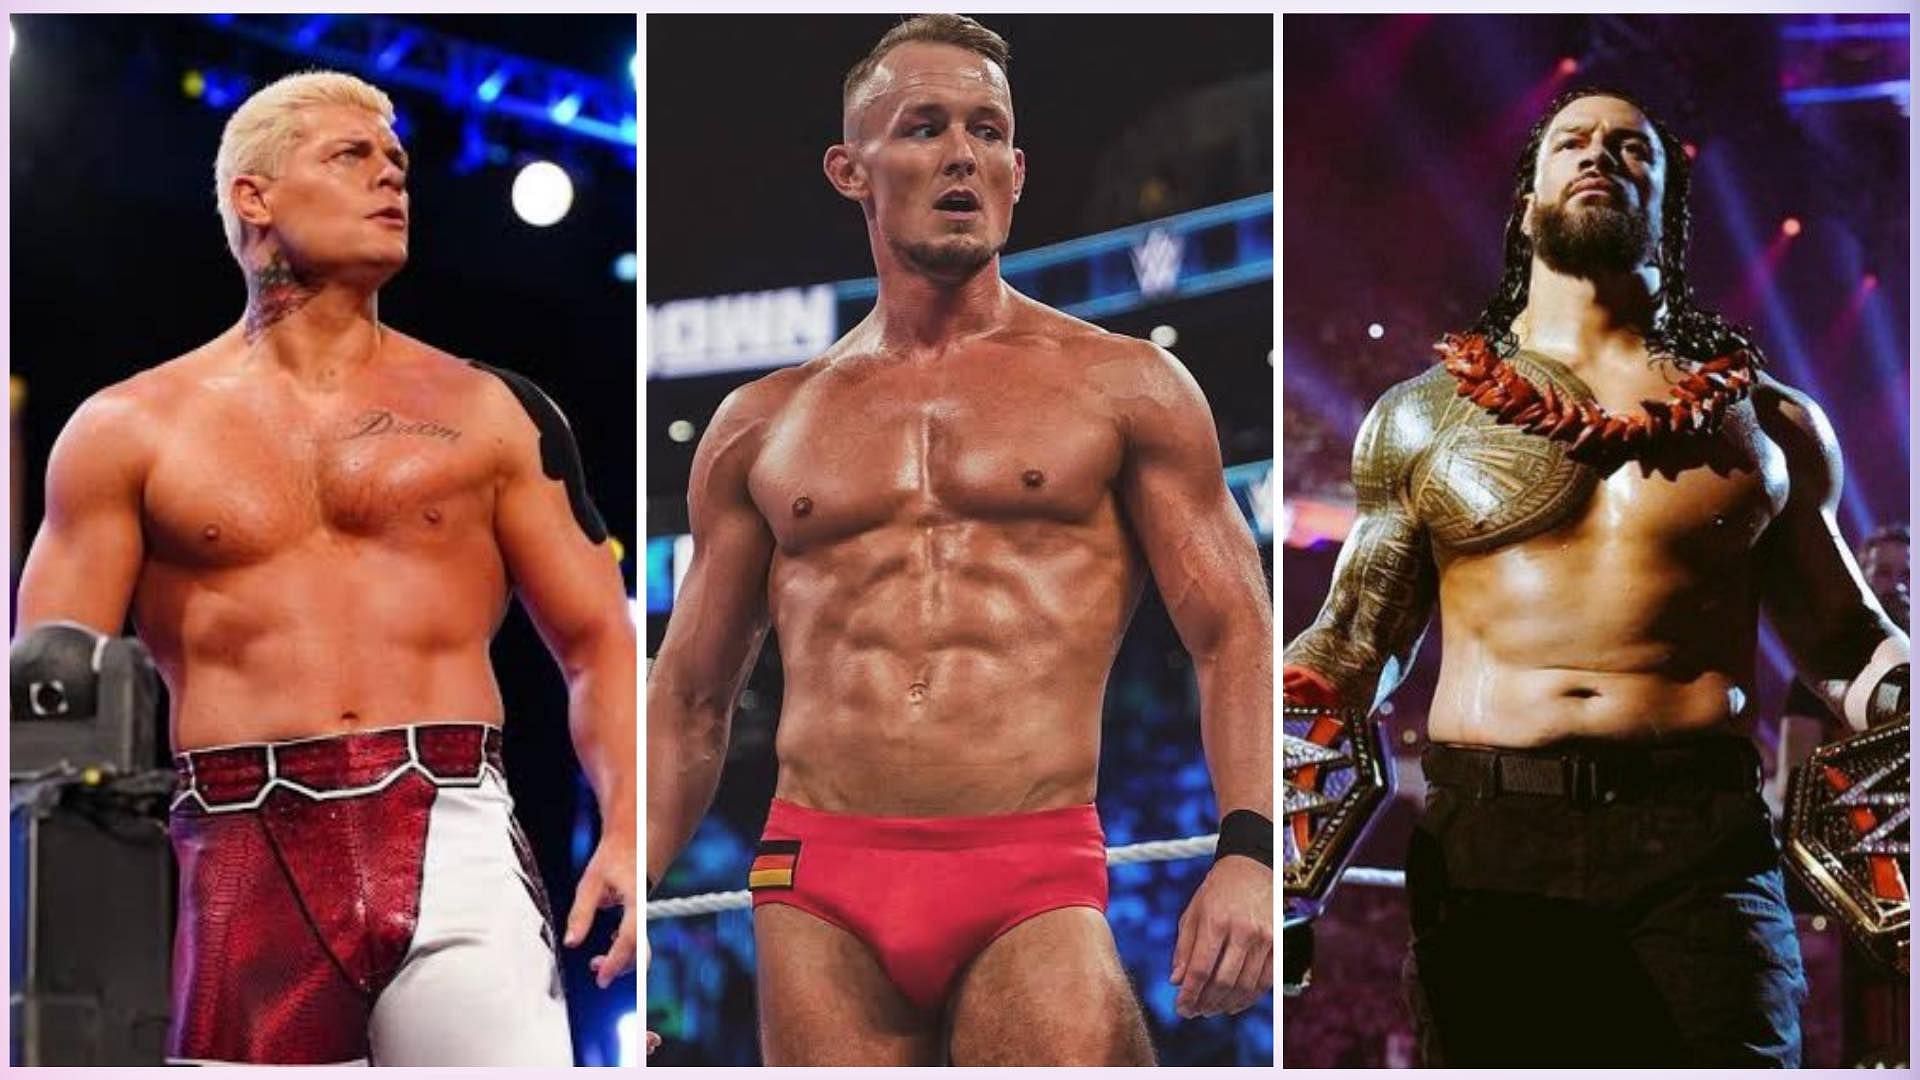 Cody Rhodes and Ludwig Kaiser are set to clash on WWE SmackDown